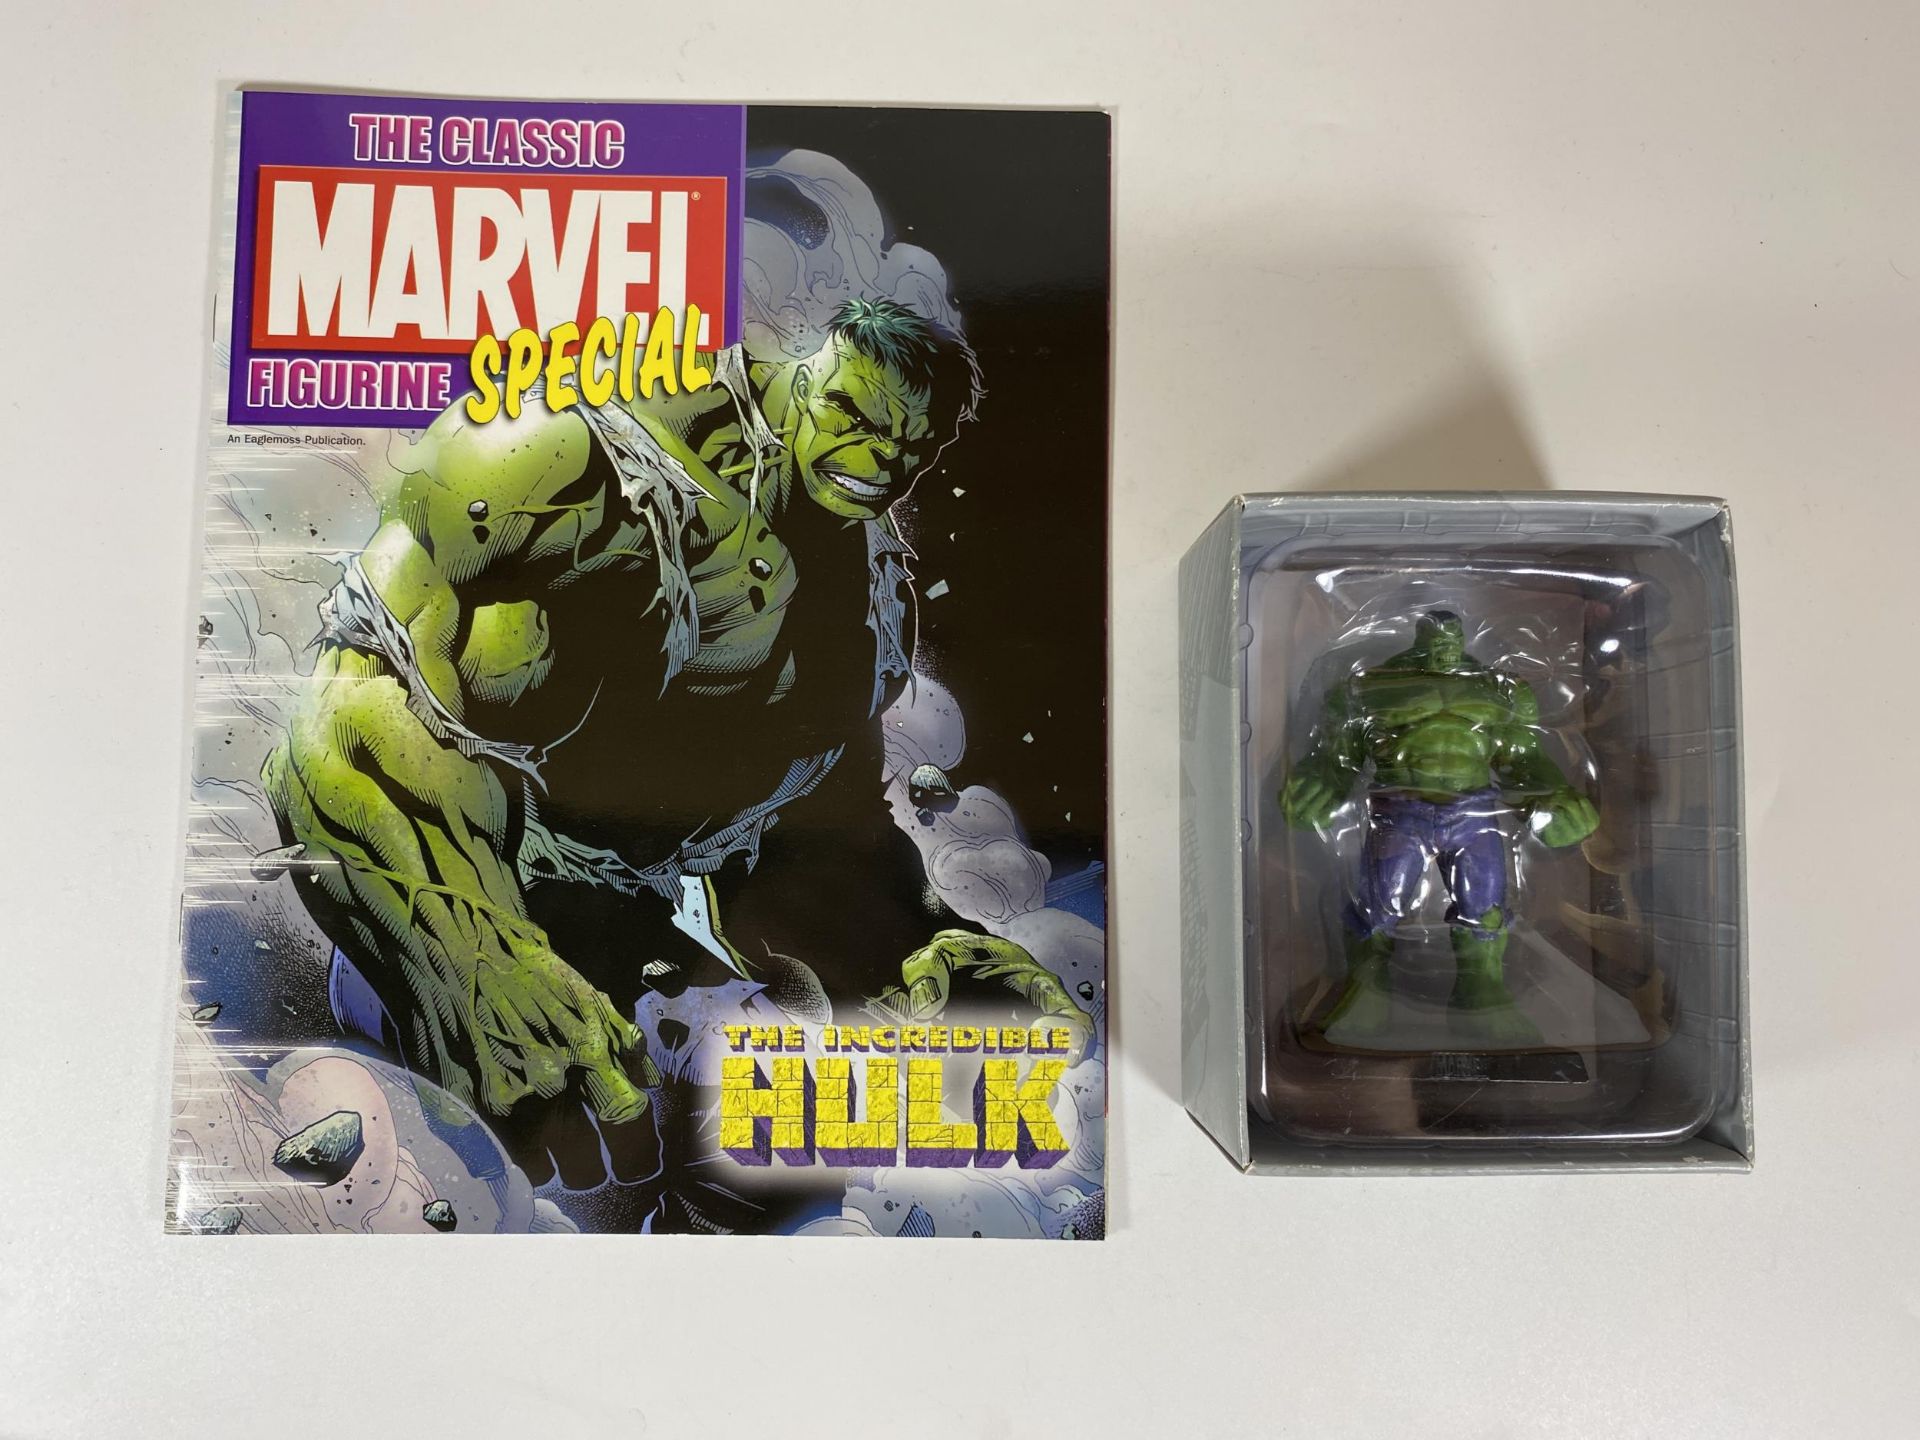 A MARVEL CLASSIC LEAD SPECIAL COLLECTORS FIGURE - HULK WITH MAGAZINE - Image 2 of 5